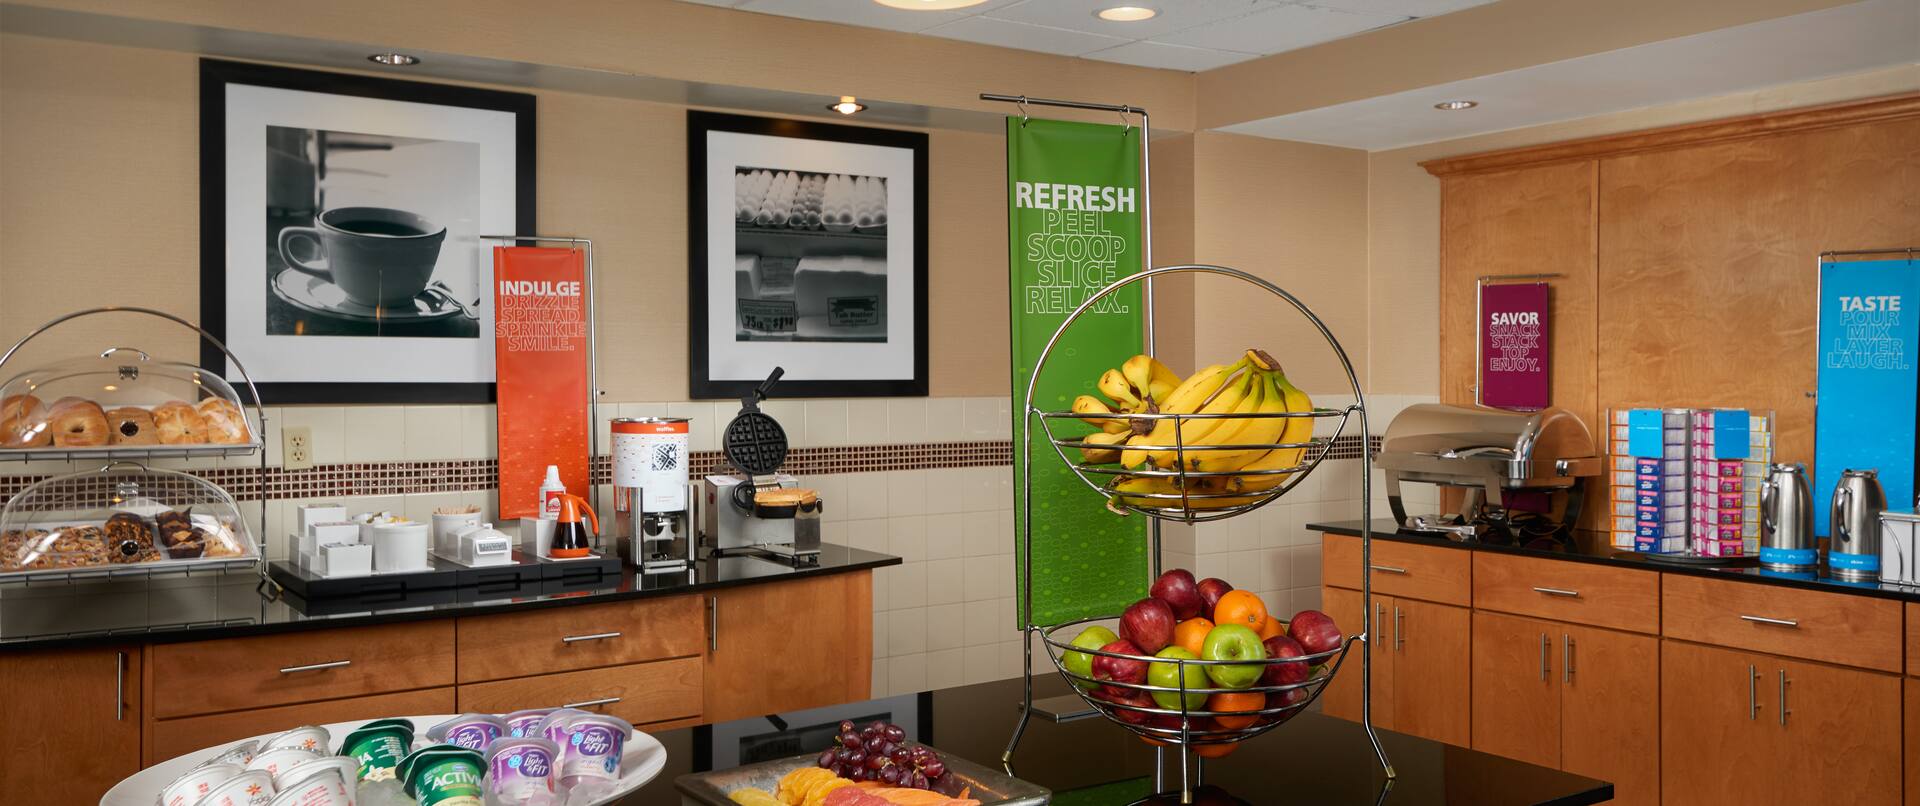 Breakfast Area with Hot Foods and Fresh Fruits